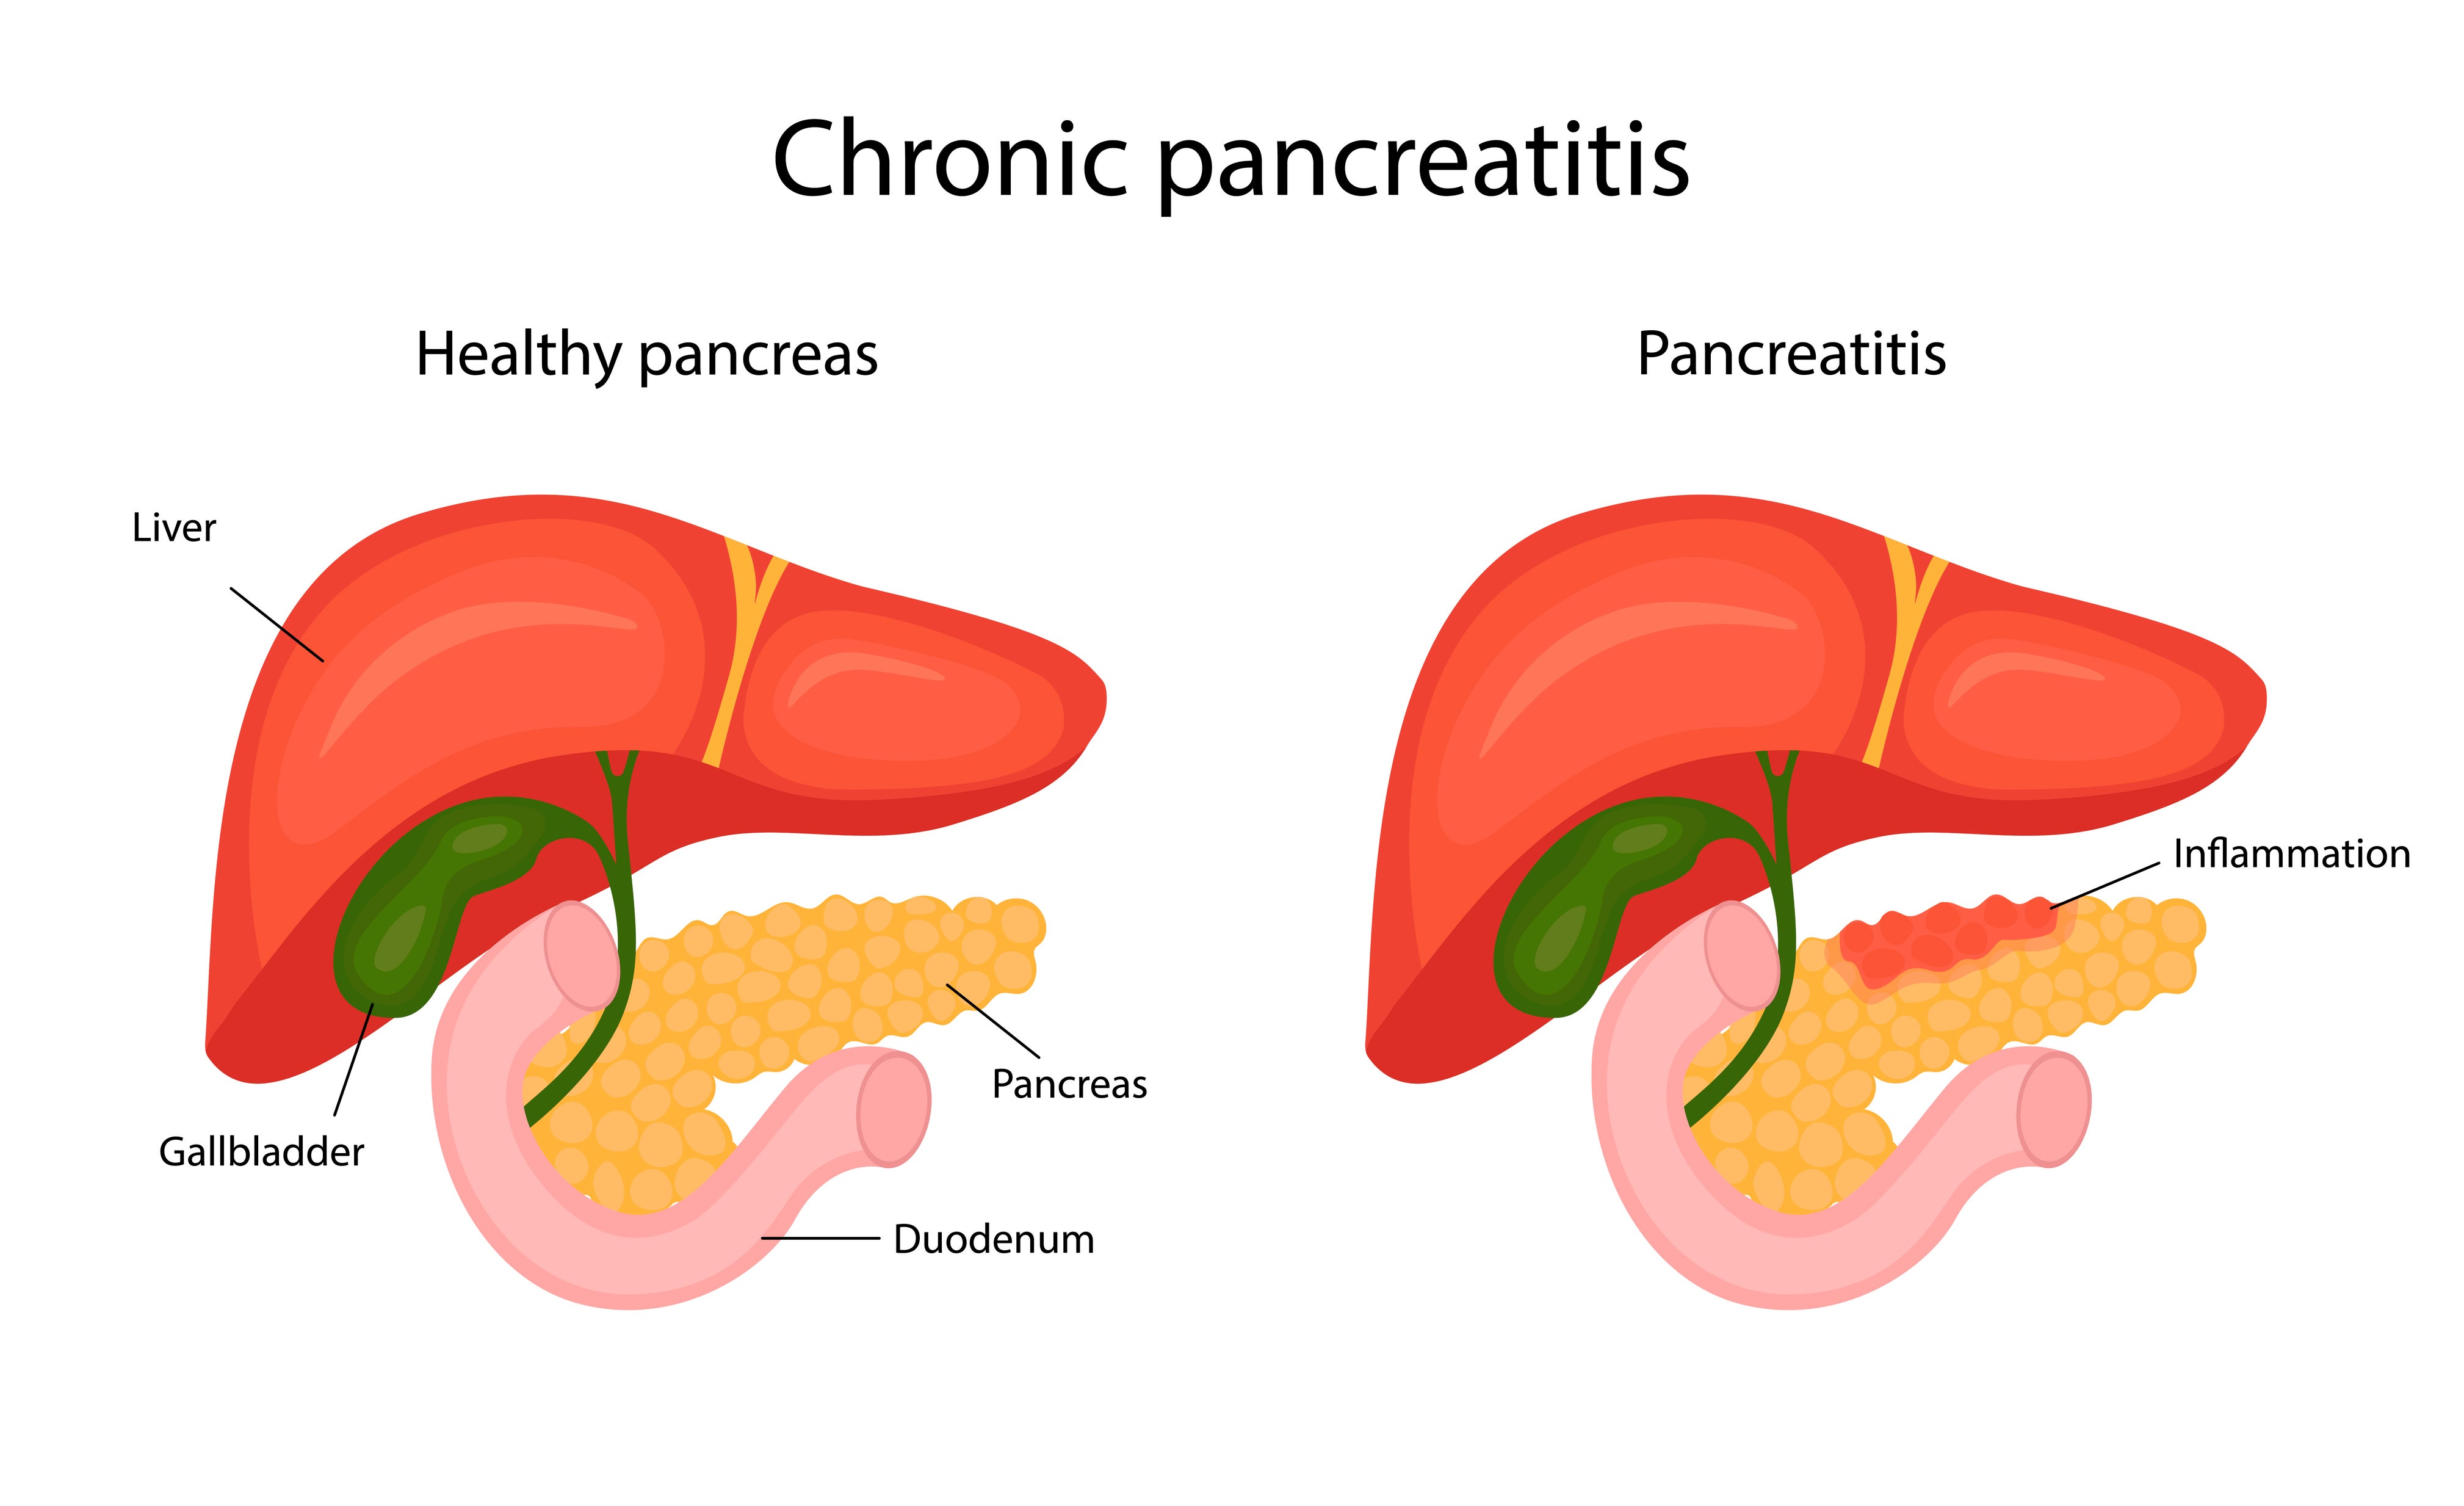 The difference between a healthy pancreas and an inflamed pancreas